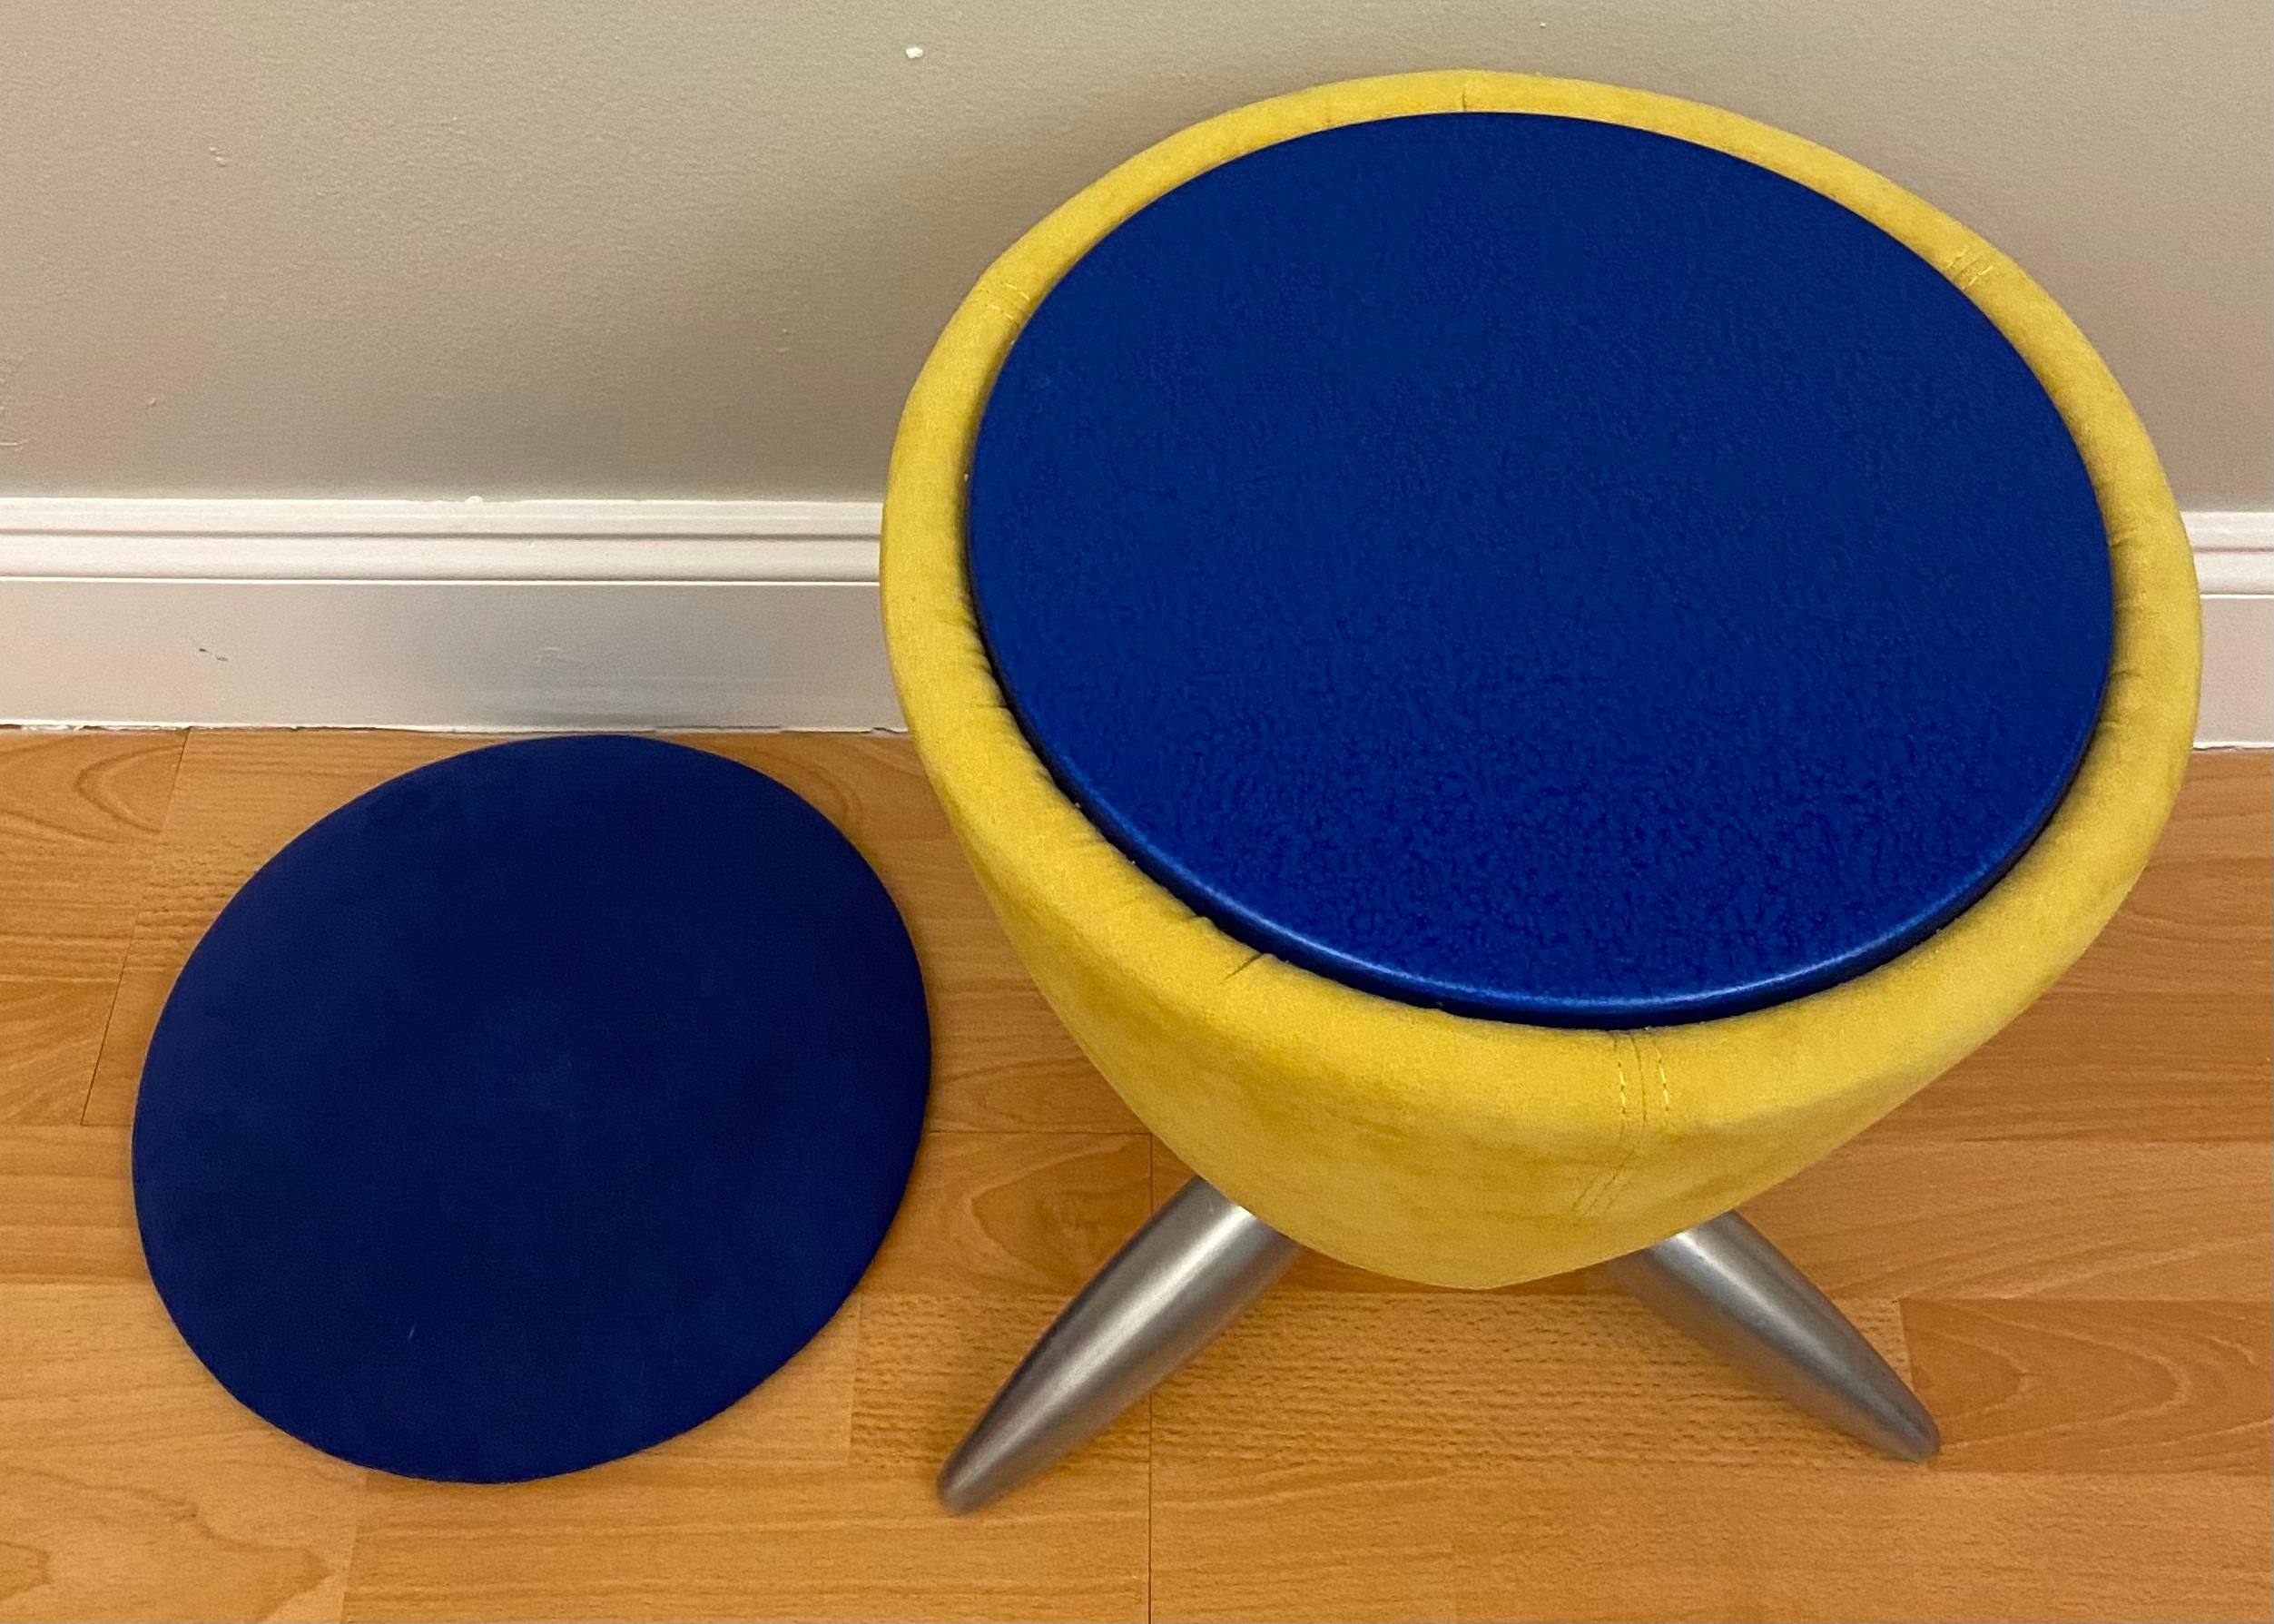 Stylish cone table stool in the manner of Verner Panton's low cone stool.
This lovely piece would look great in a contemporary or modern setting. 

The blue upholstered top makes a nice stool for extra seating. 
Remove and it's a side table between